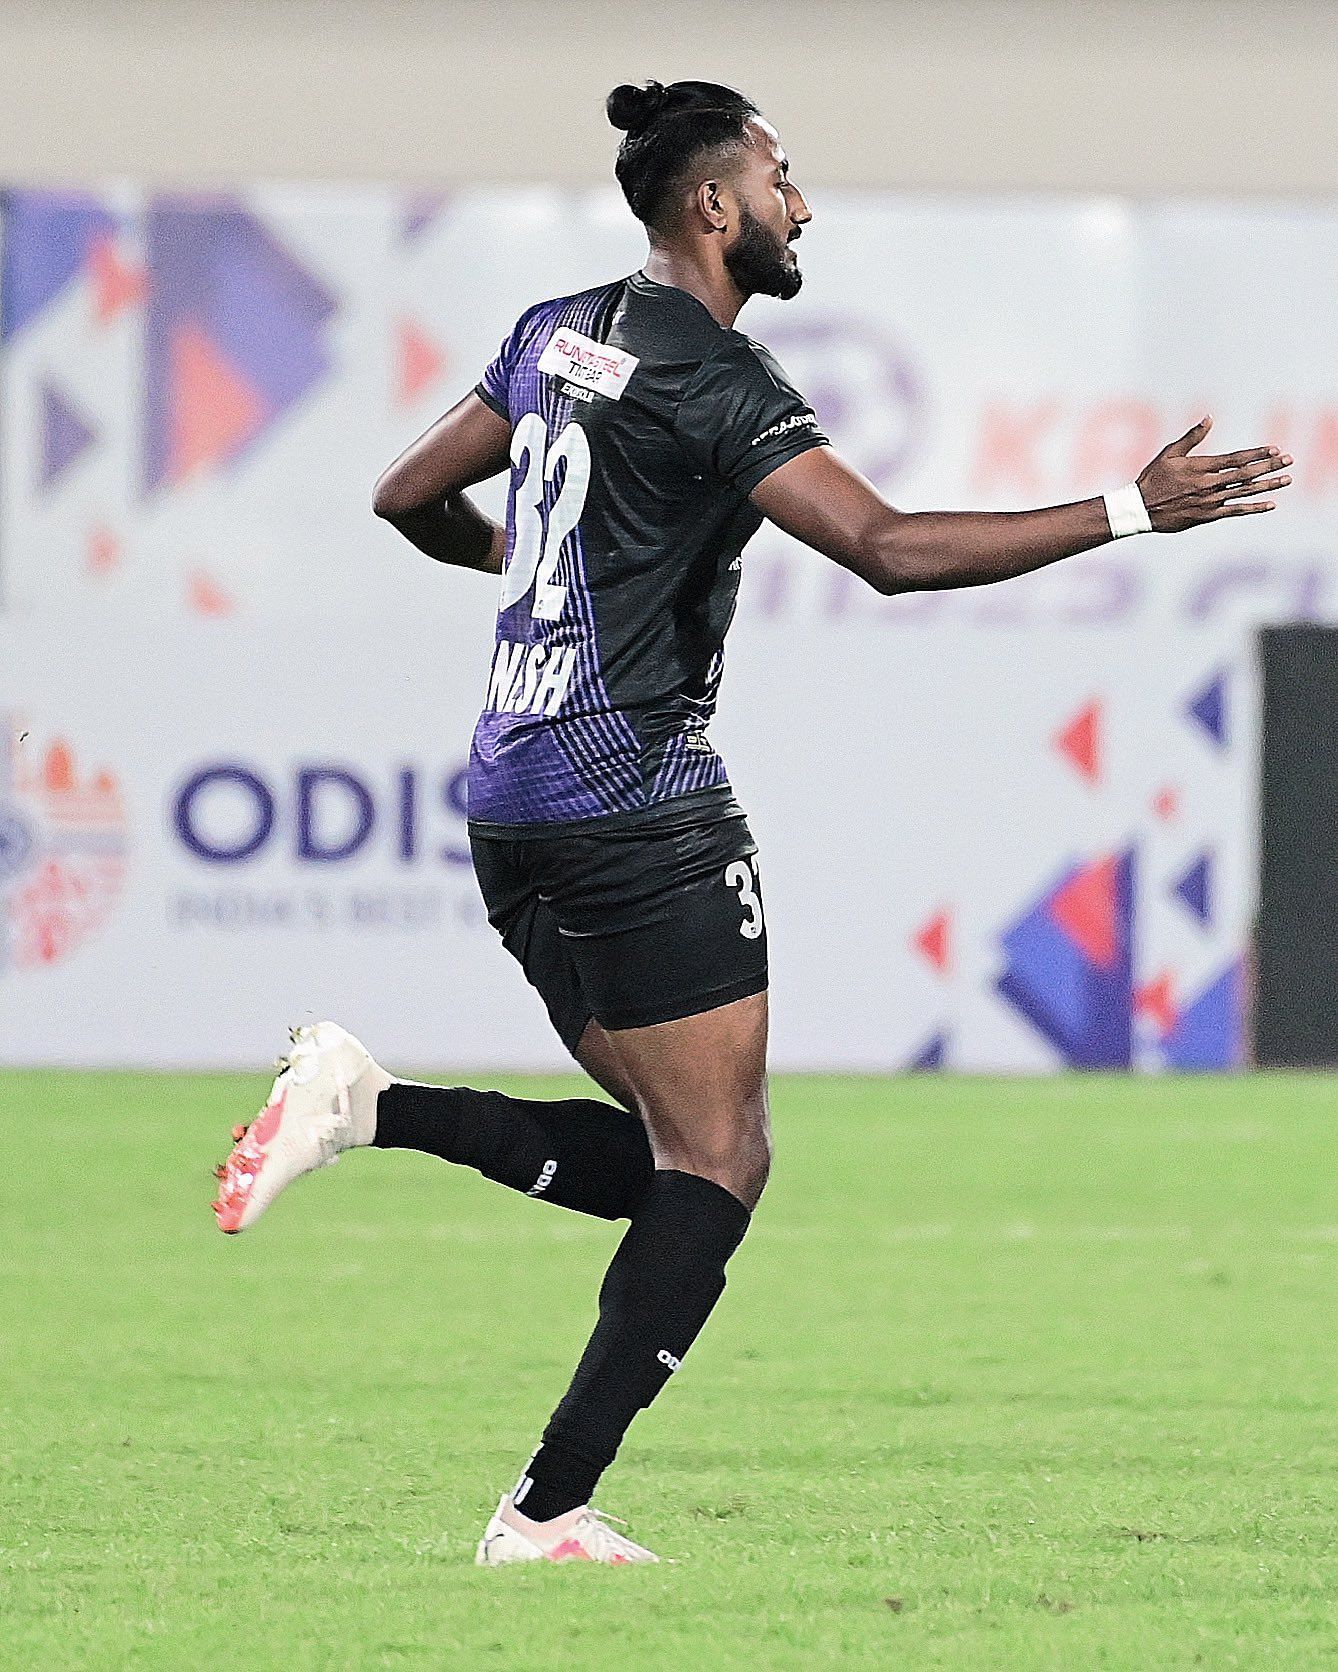 Vignesh has starred at left-back for Odisha FC after moving there on loan. (OFC Twitter.)